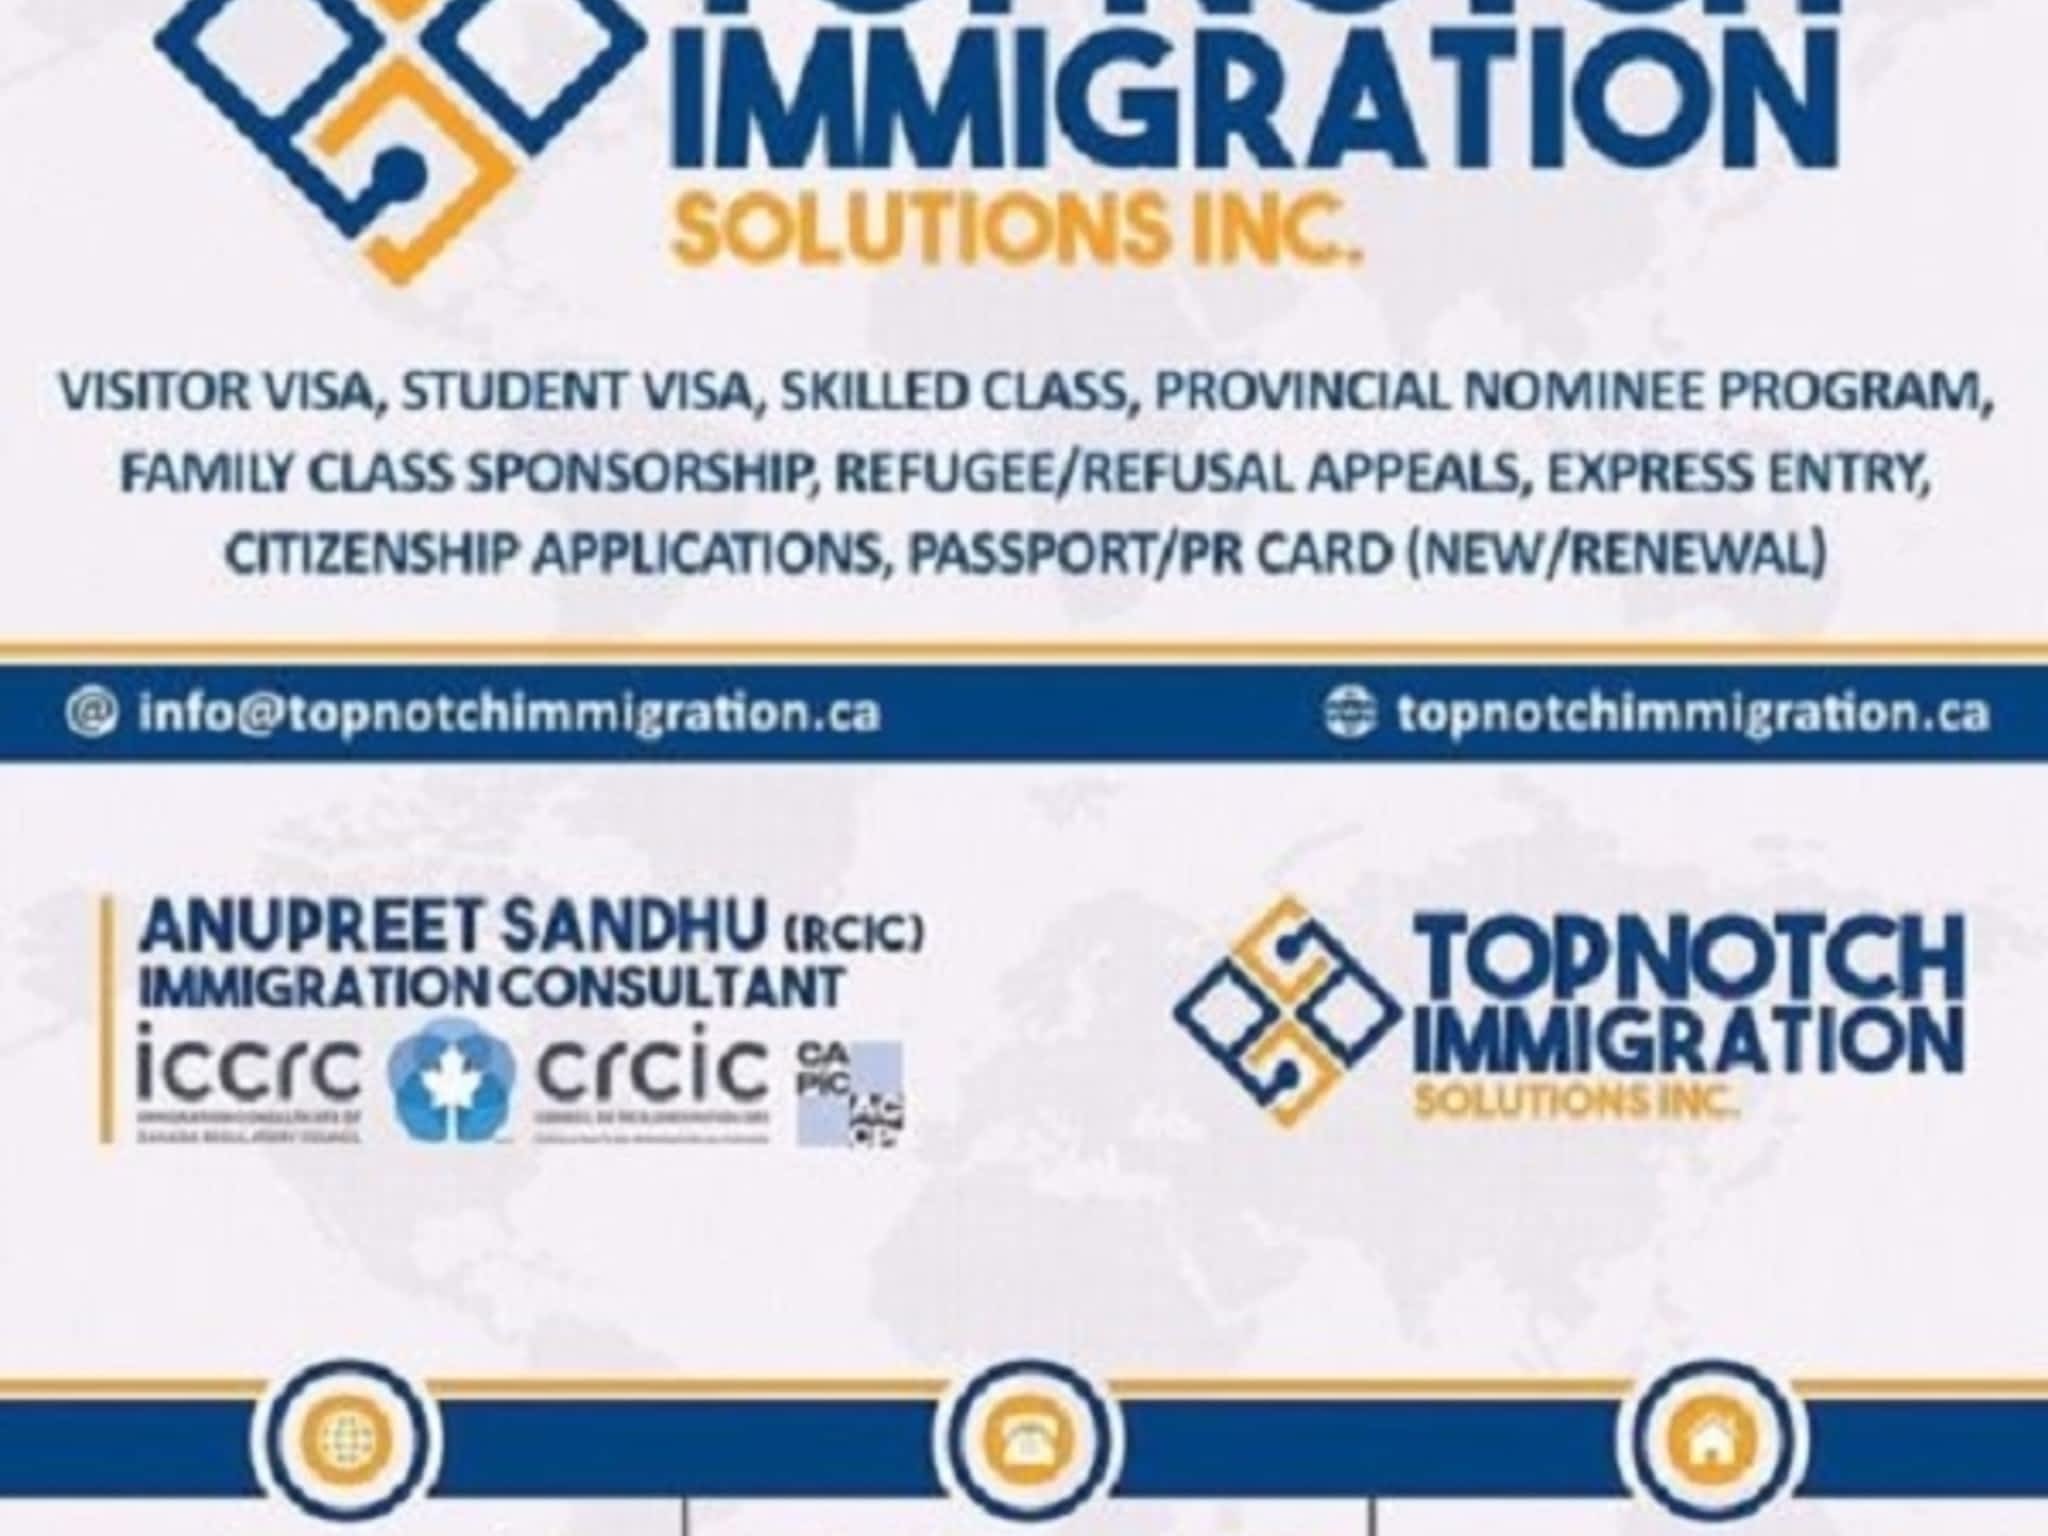 photo Topnotch Immigration Solutions Inc